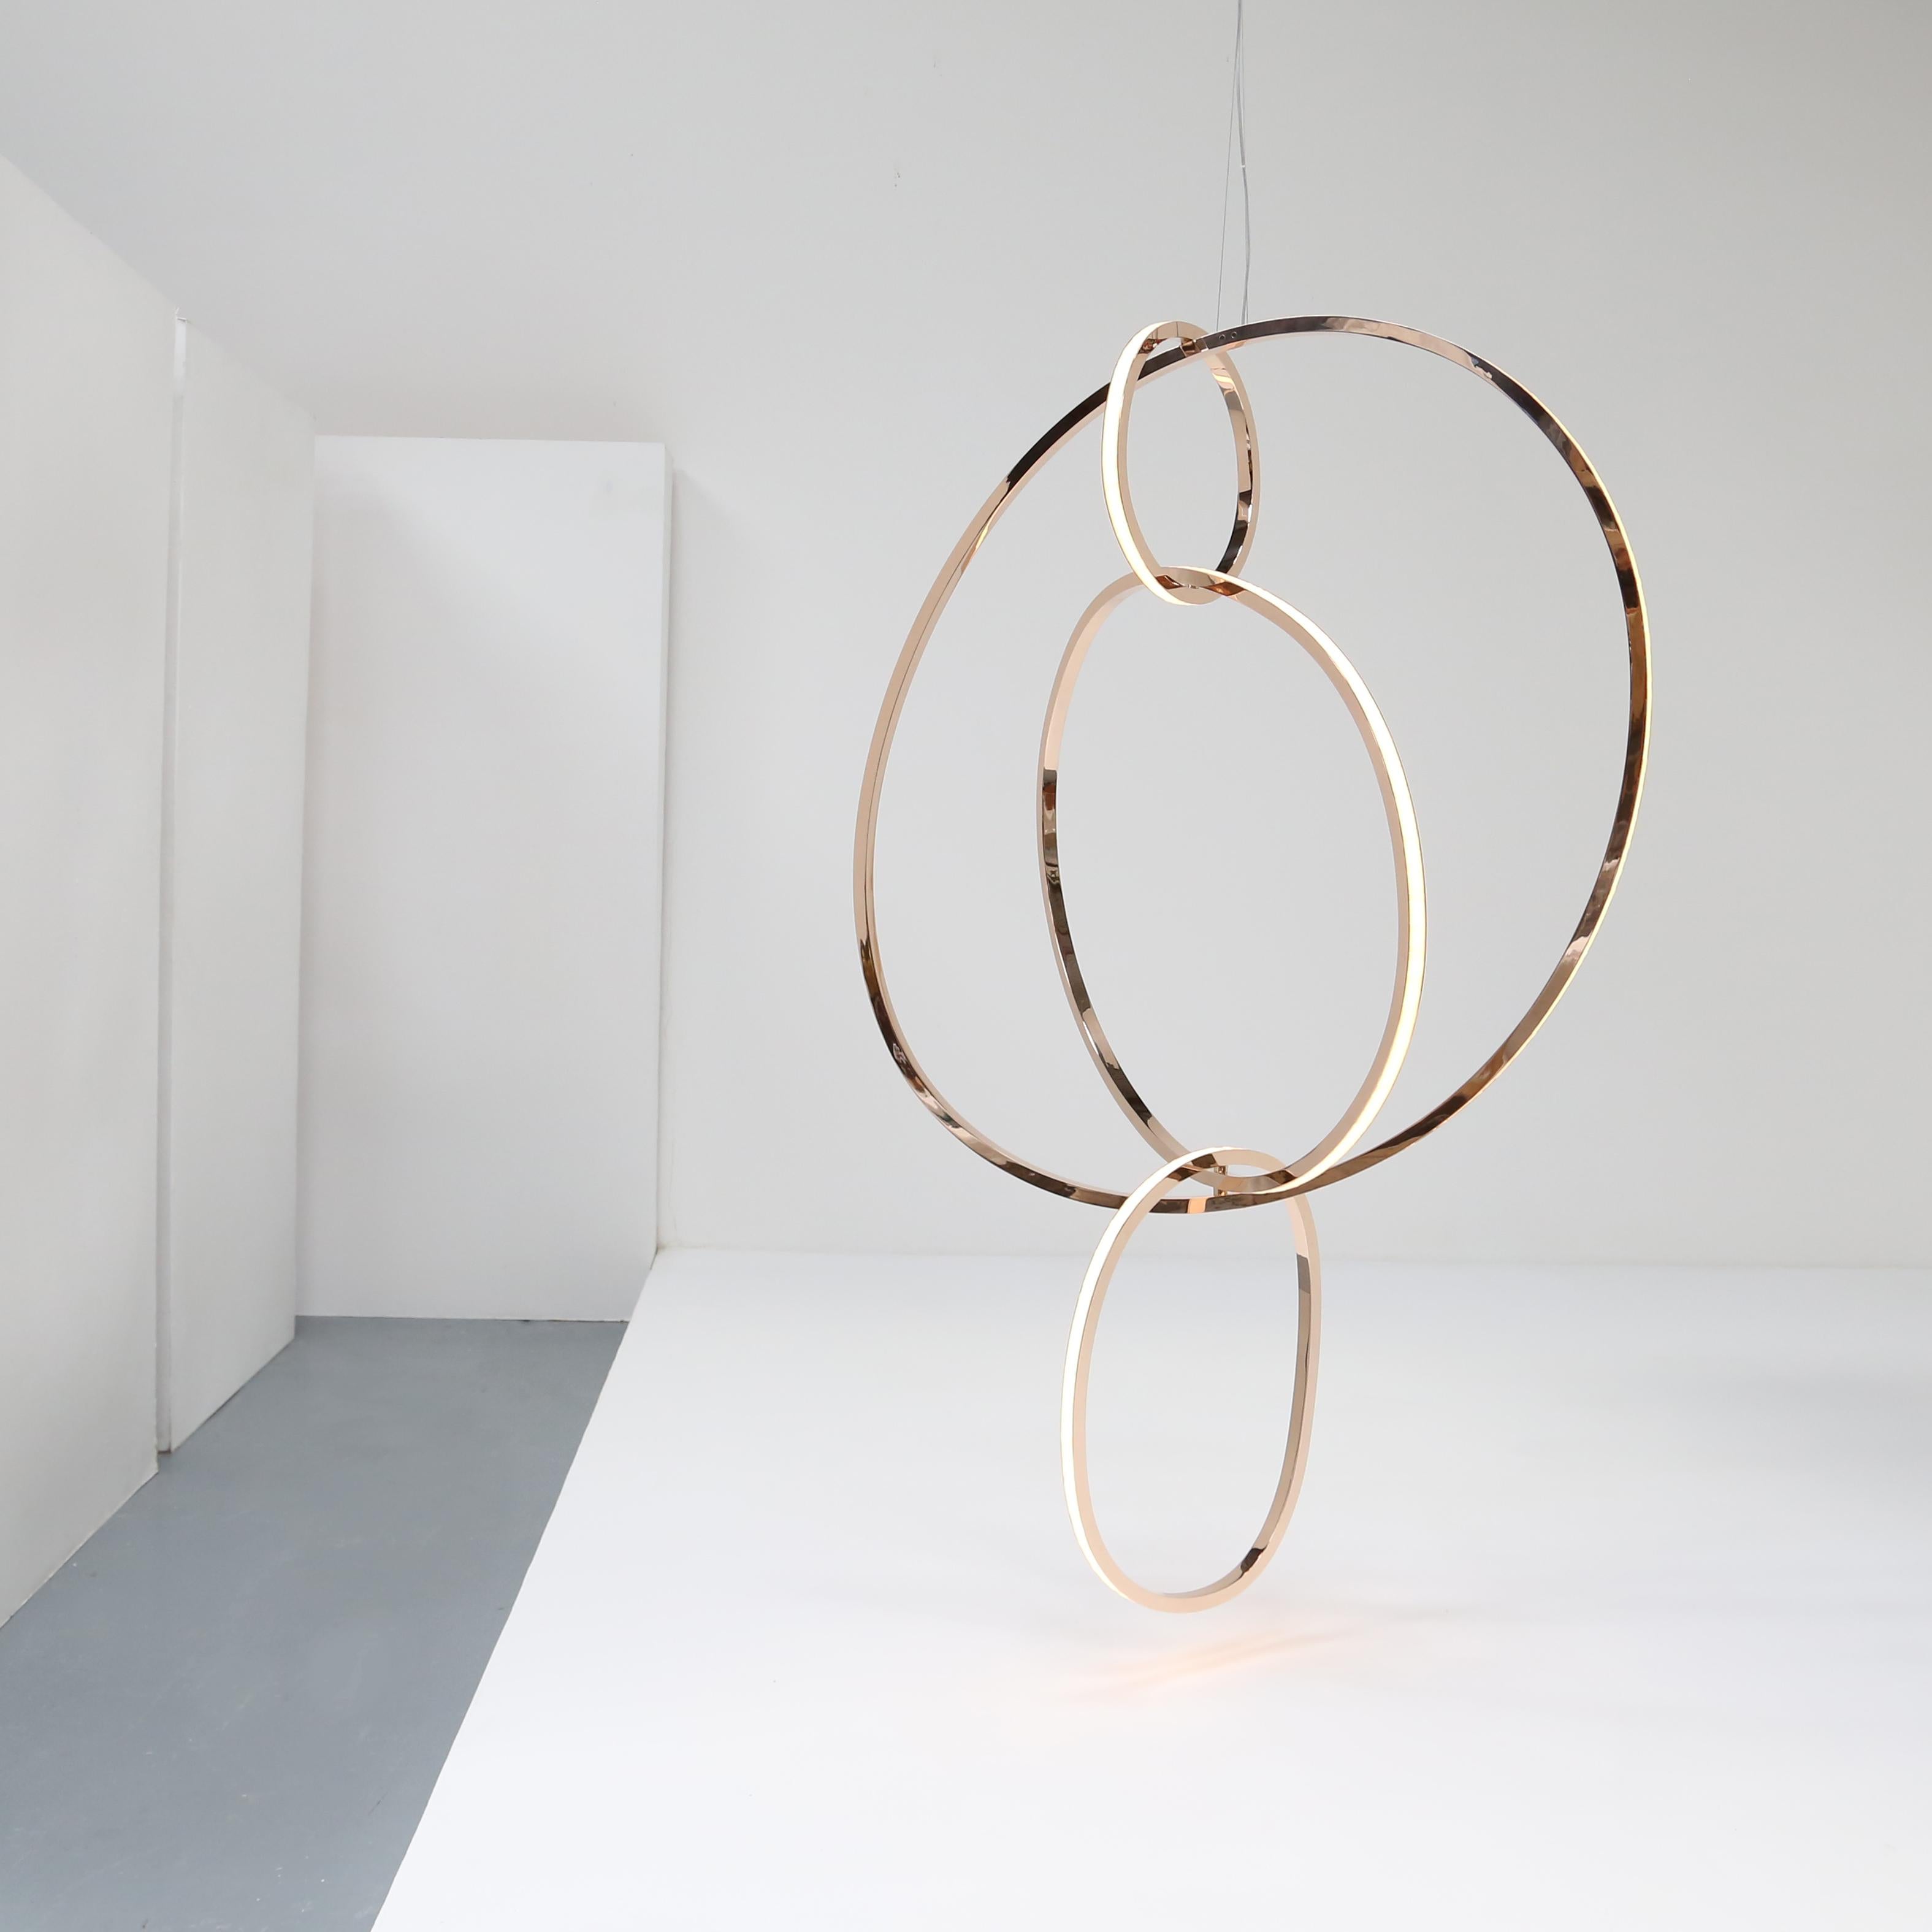 This elegant arrangement of vertically strung rings, made up of solid polished bronze and opal glass sheathed LEDs, is singular in its beauty from each angle a subtly different representation of calm, quiet, stillness that gives forth a warm, soft